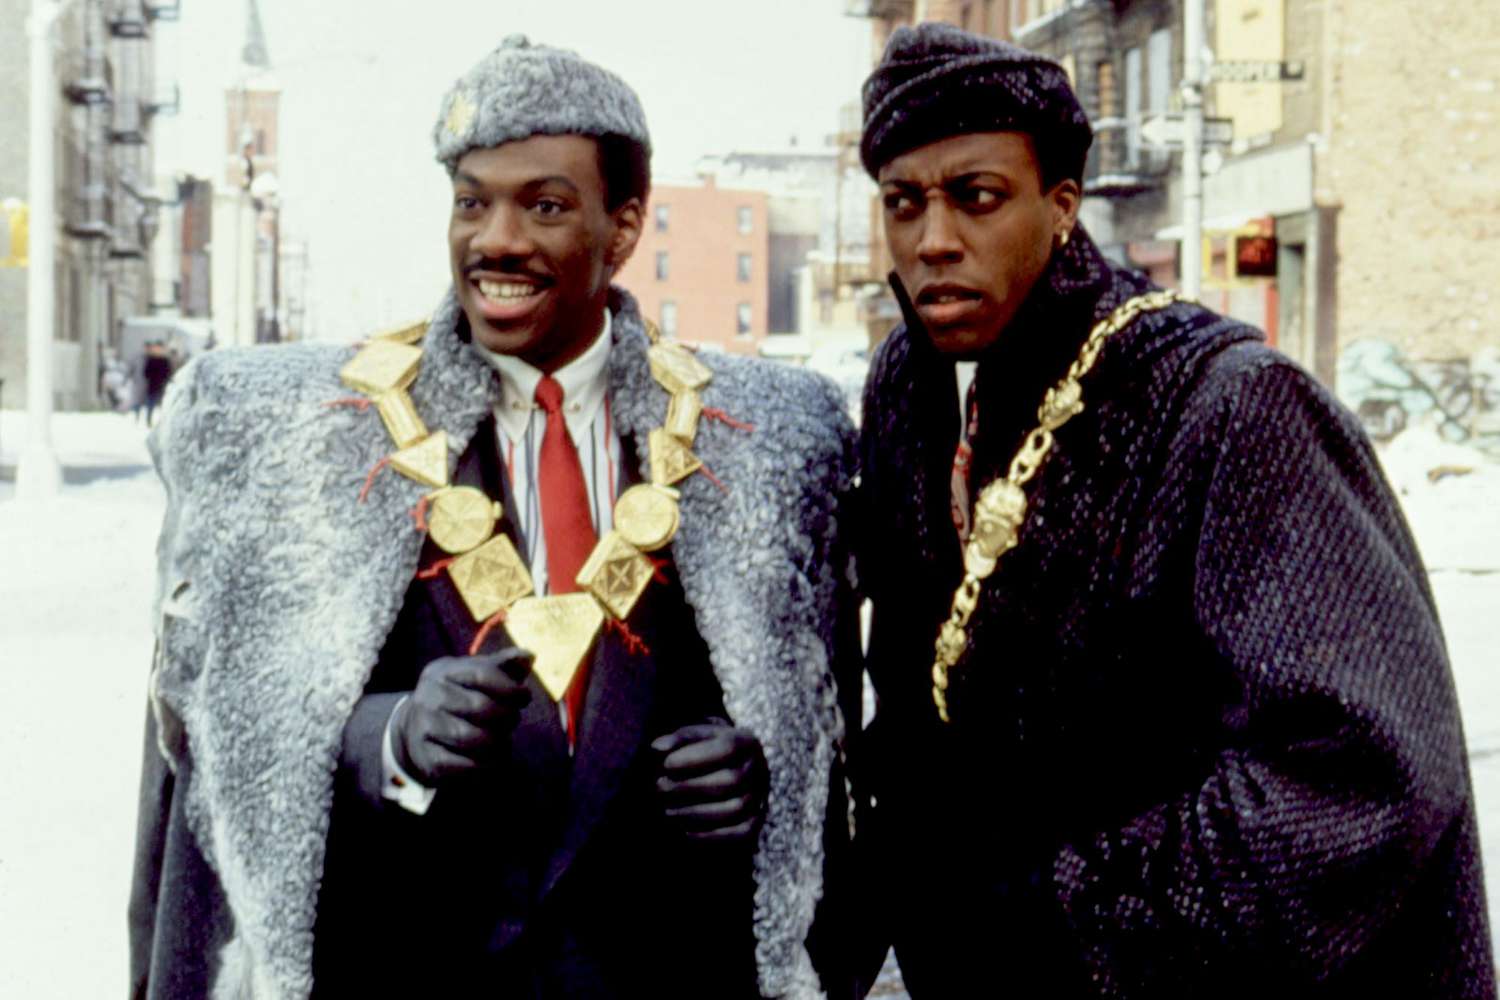 “Coming to America” Sequel to Debut on Amazon Prime on March 5, 2021